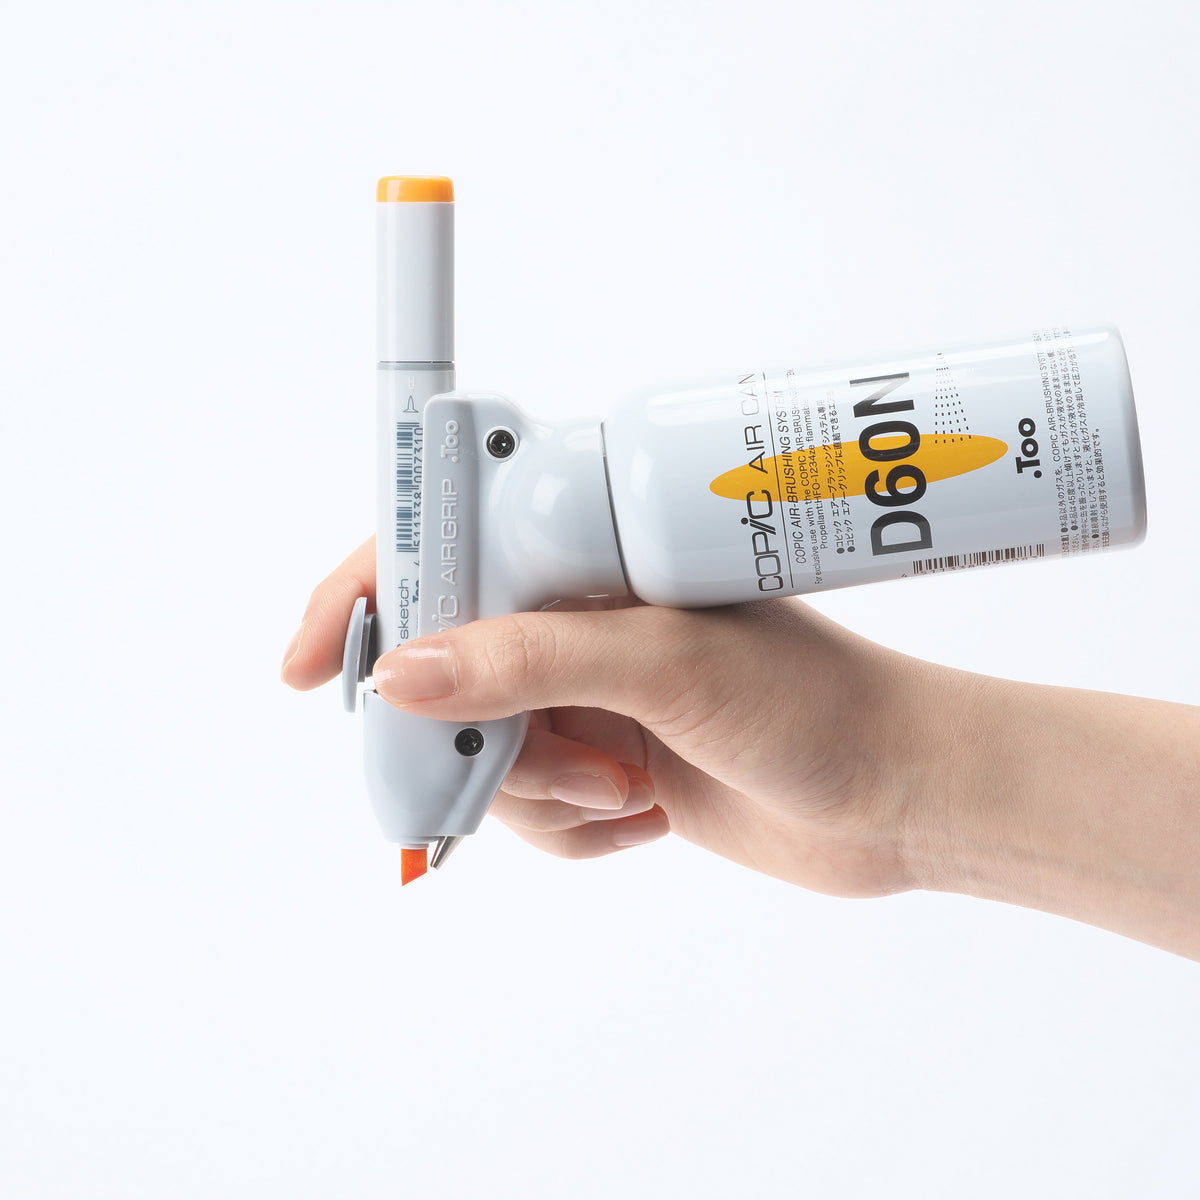 Copic Air Brushing System: Air Can Set